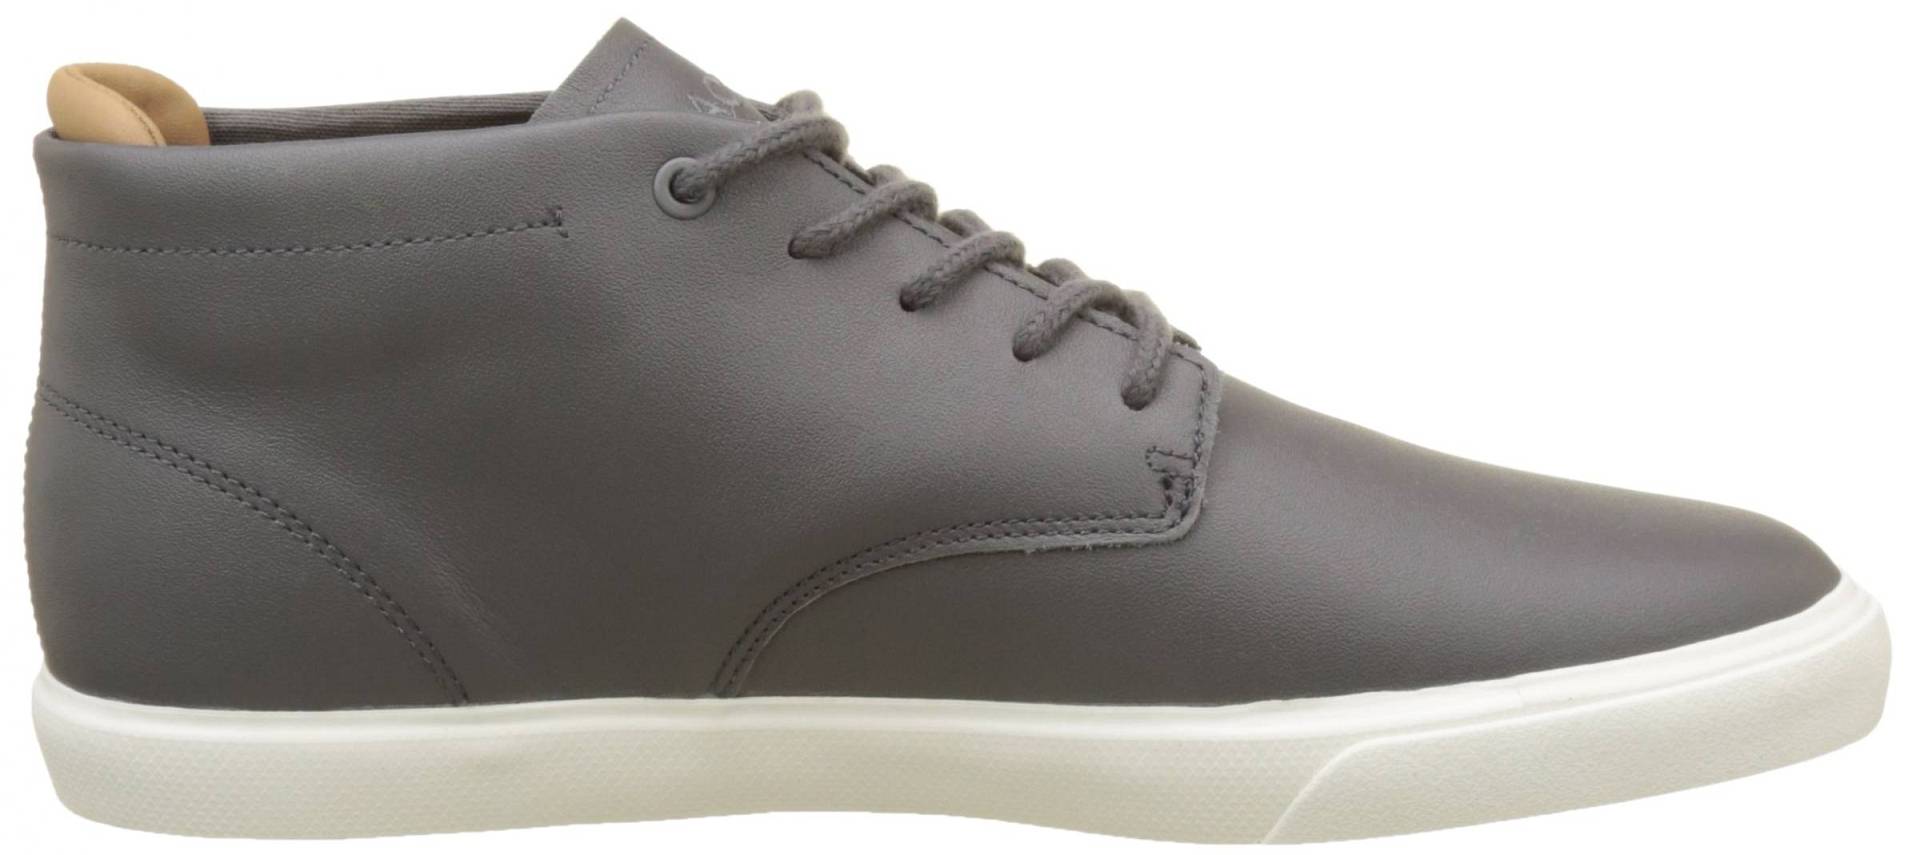 Lacoste Espere Chukka 317 1 Shoes Reviews Reasons To Buy